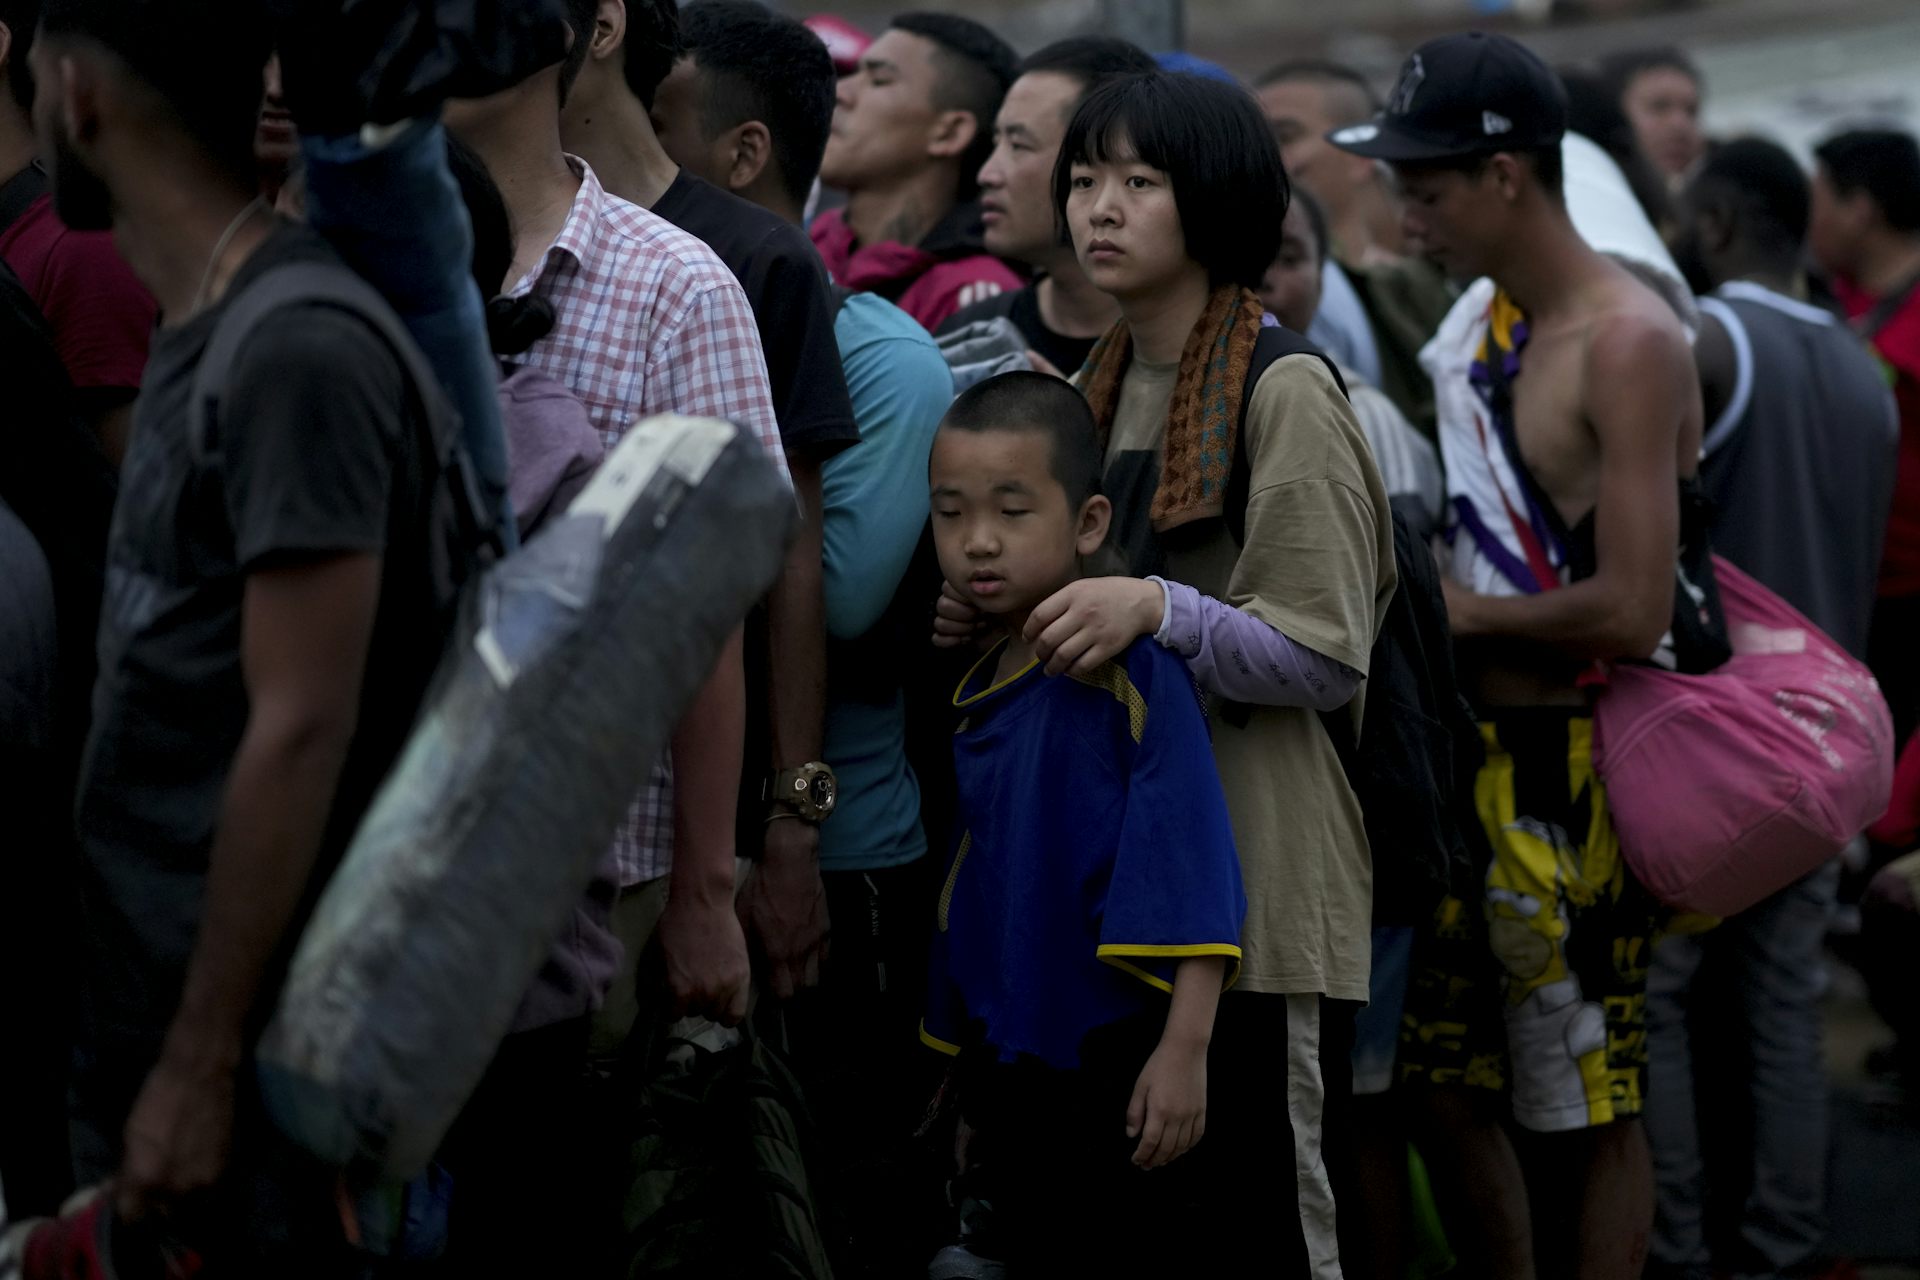 Chinese migration to US is nothing new – but the reasons for recent surge at Southern border are